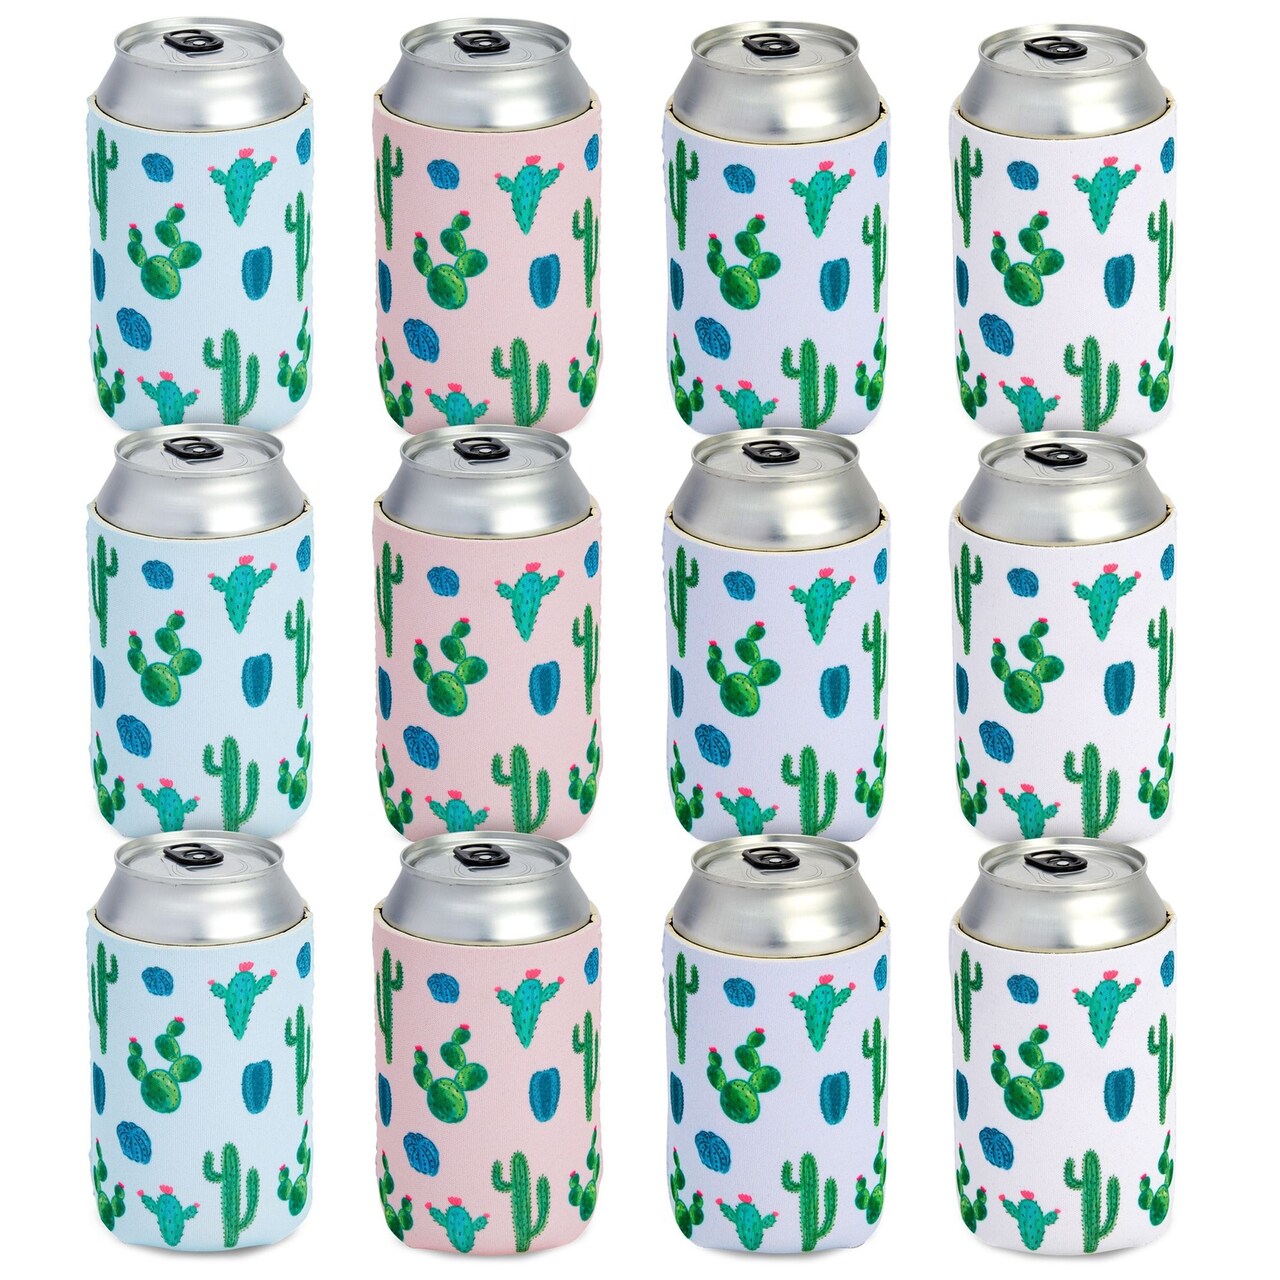 12 Pack Neoprene Soda Sleeves for Beer Cans, Soft Drinks, Beverages, Water  Bottles, Cooler Sleeves for Cactus Party Supplies, Wedding Favors,  Bachelorette Party